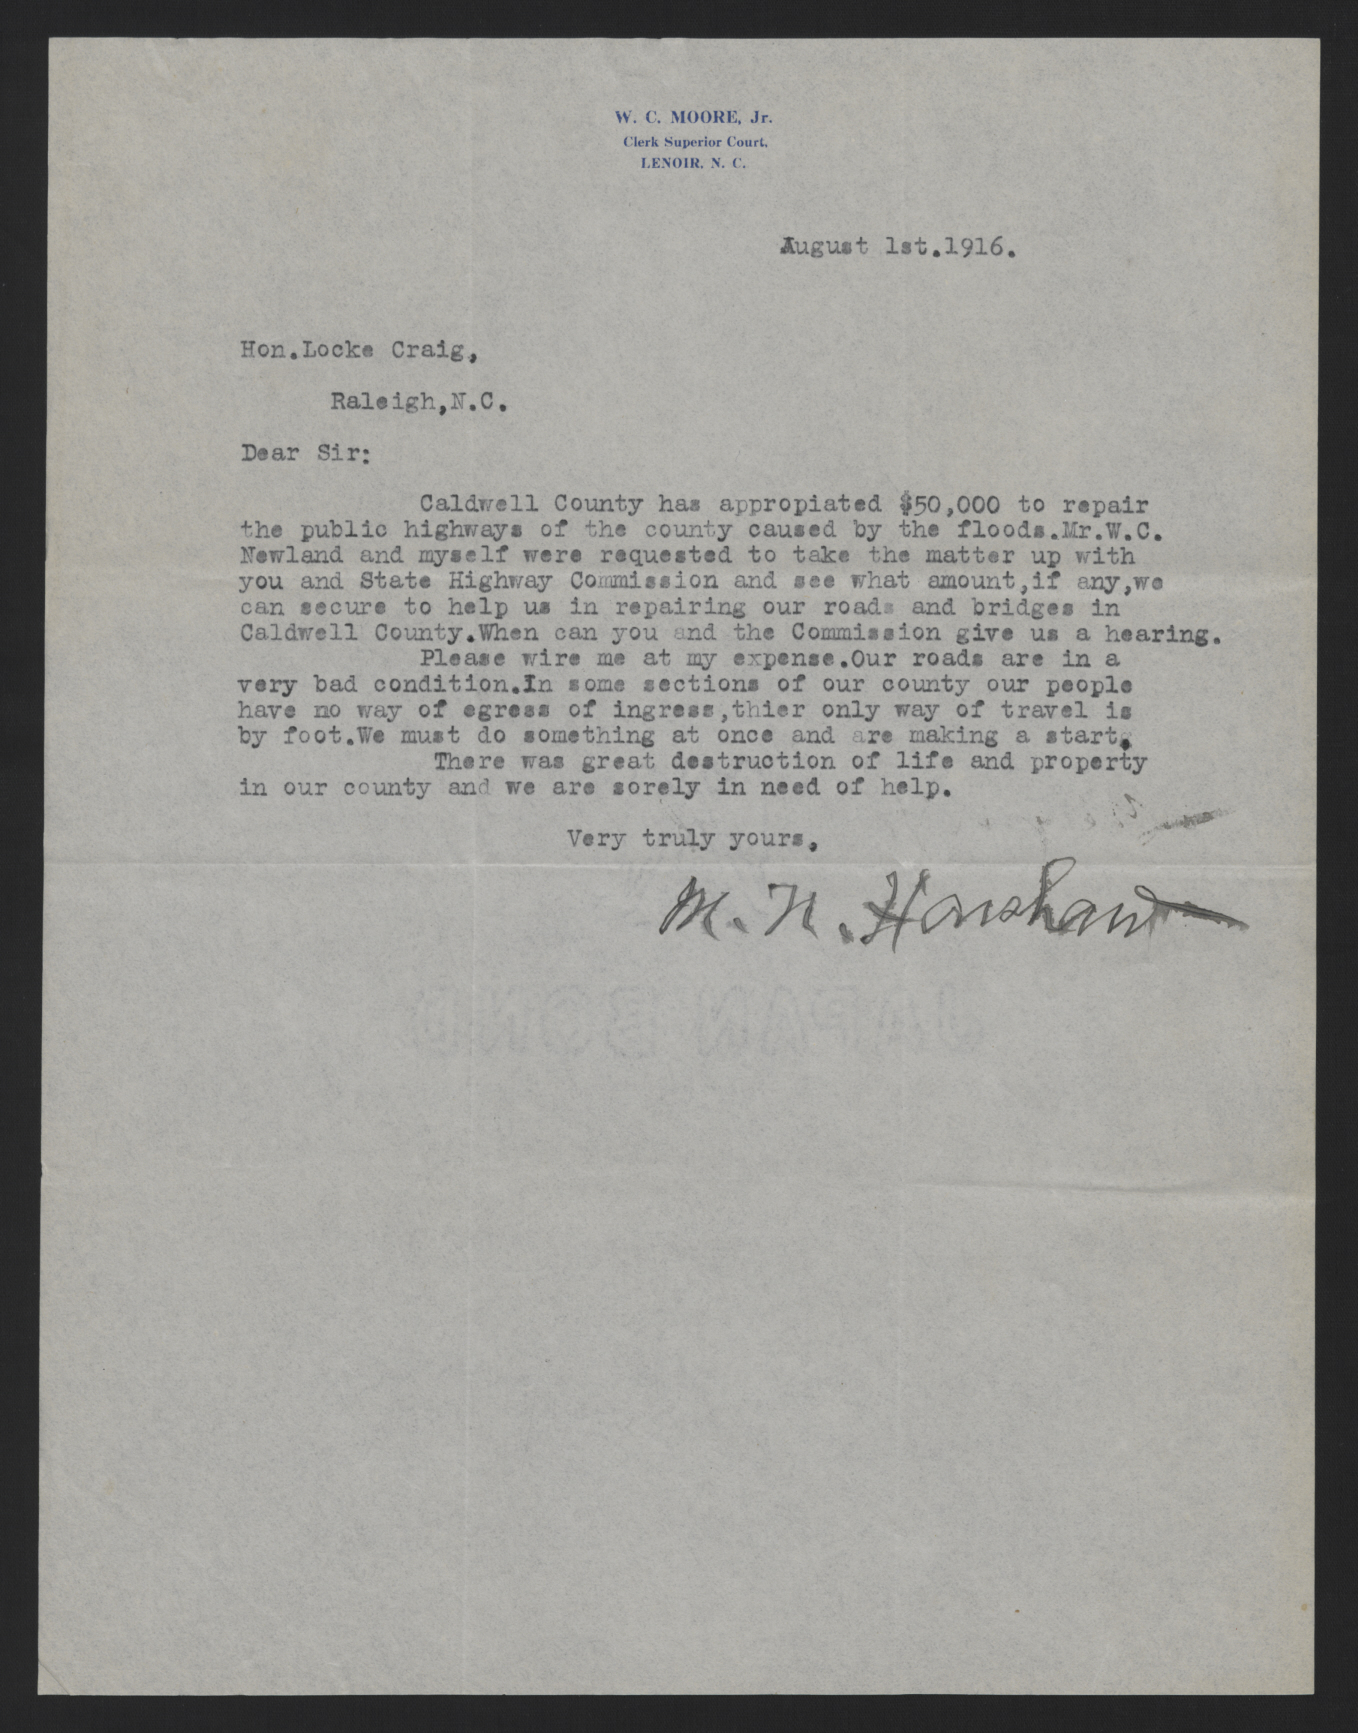 Letter from Harshaw to Craig, August 1, 1916